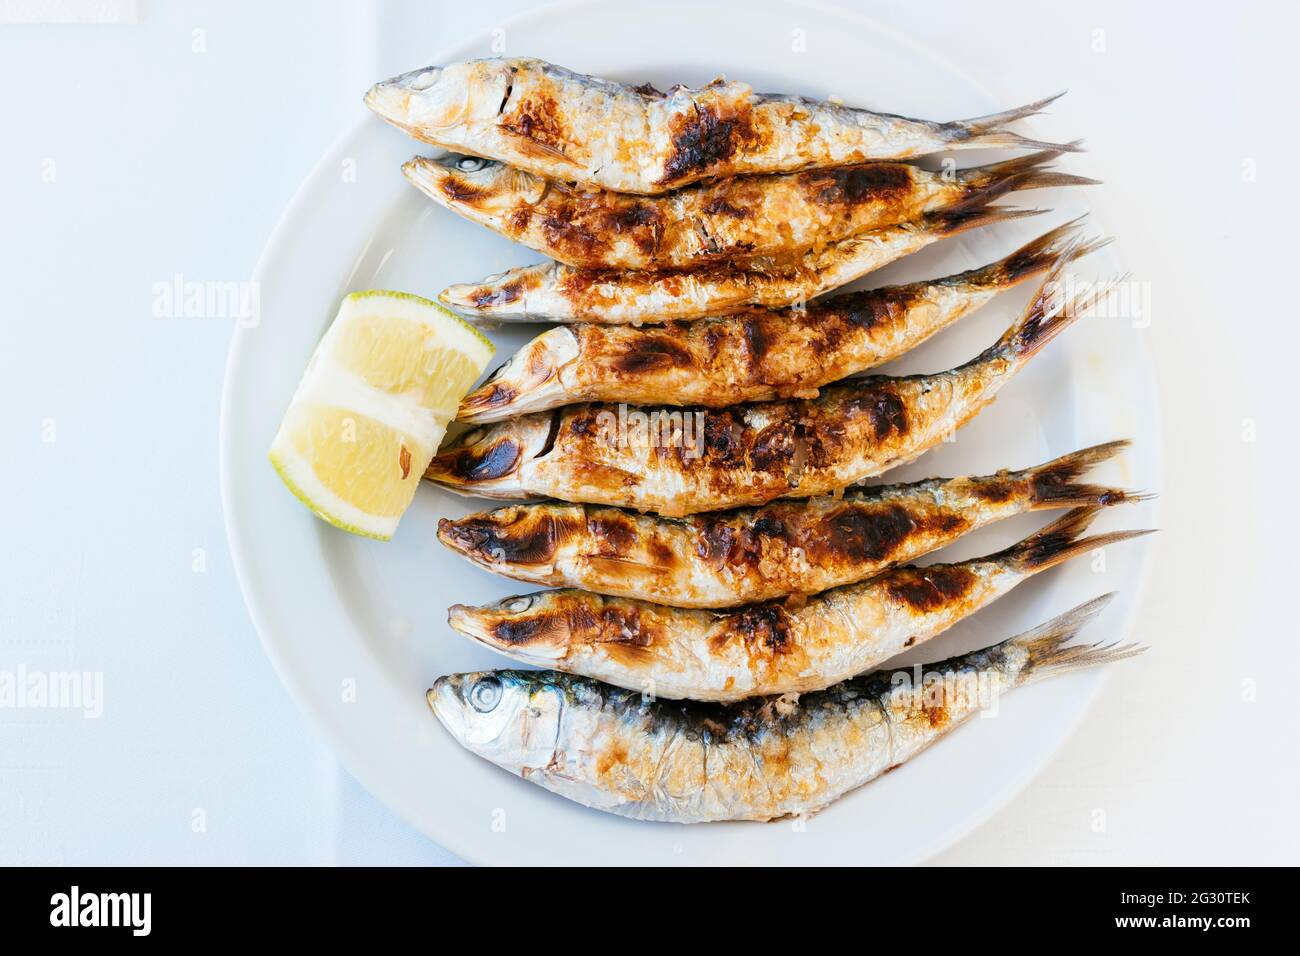 Typical Andalusian food. Grilled sardines - Sardines barbecueing. Torremolinos, Málaga, Andalucía Spain, Europe Stock Photo